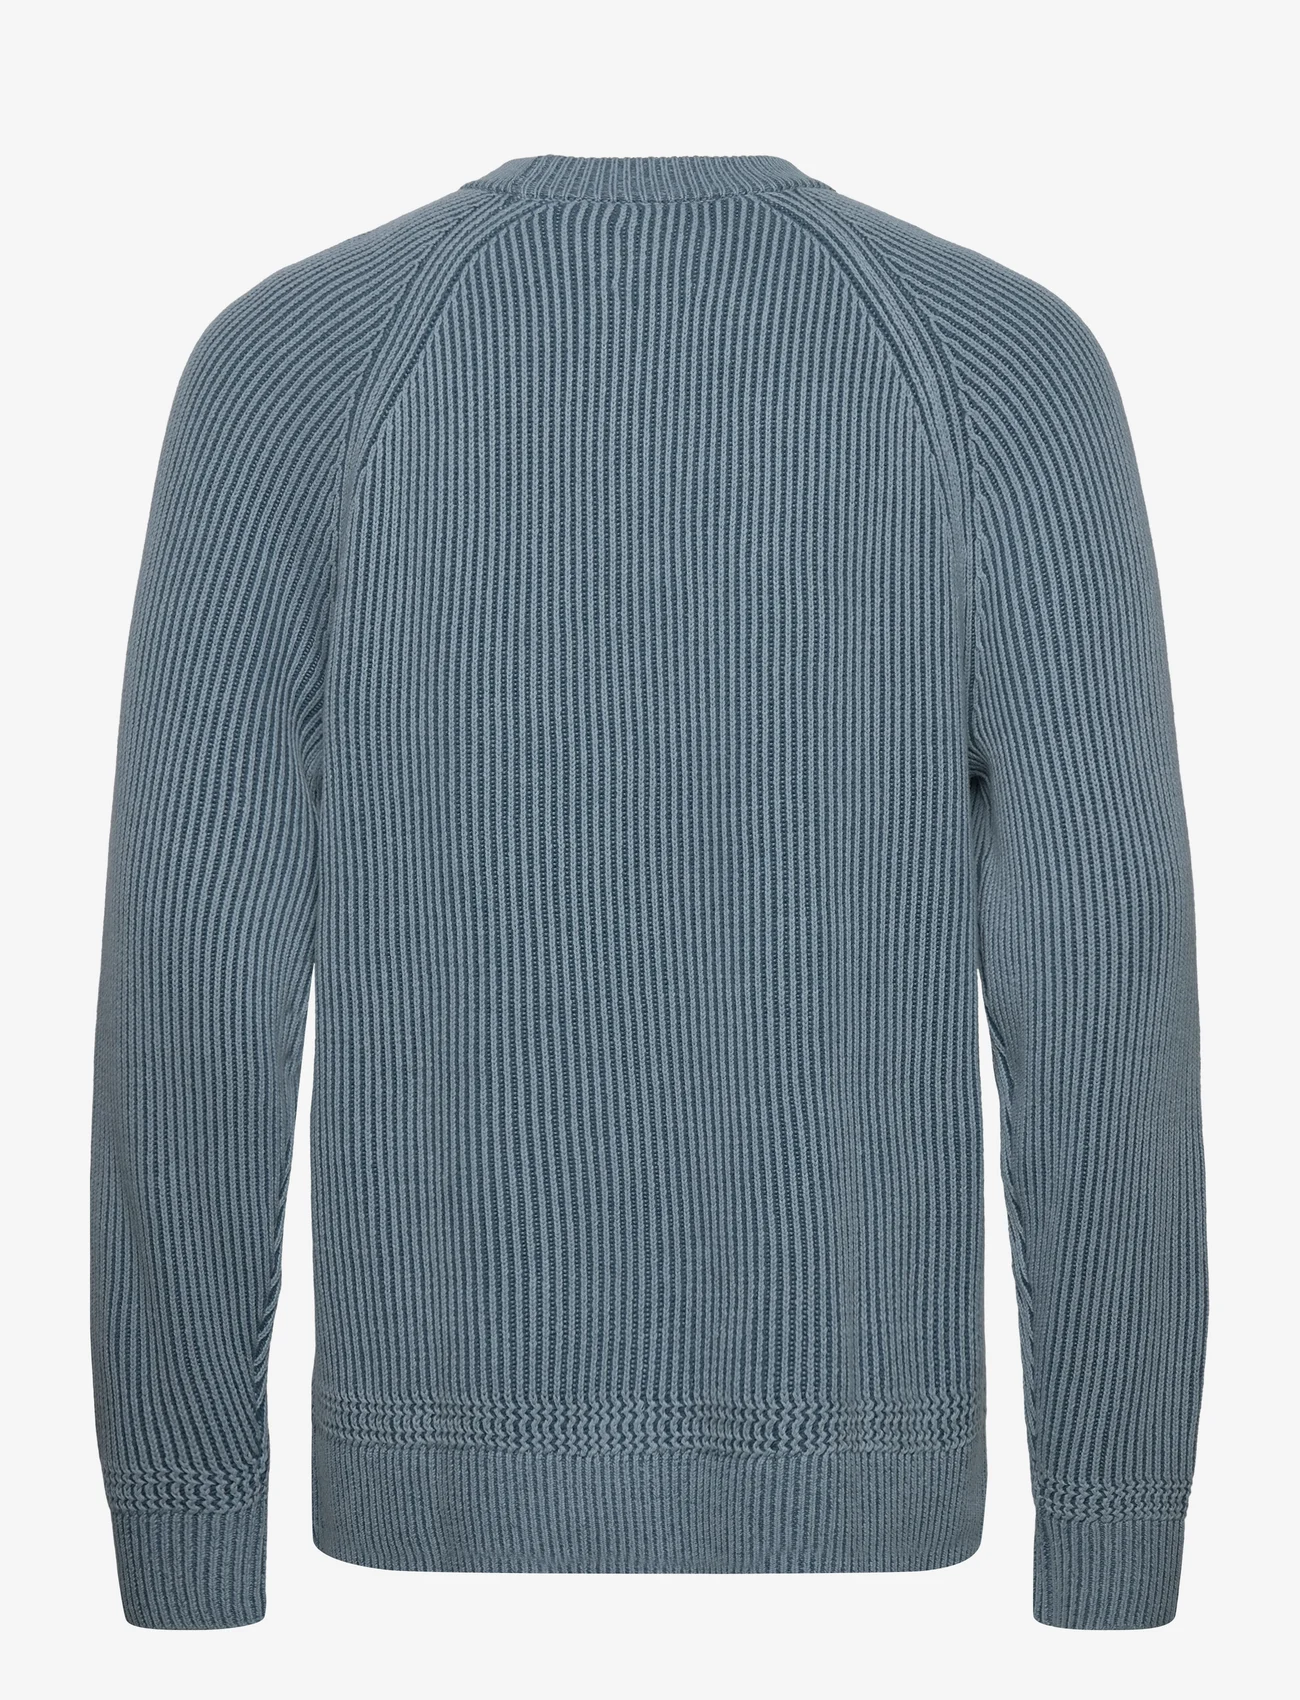 Abercrombie & Fitch - ANF MENS SWEATERS - rundhals - citadel/stargazer - 1